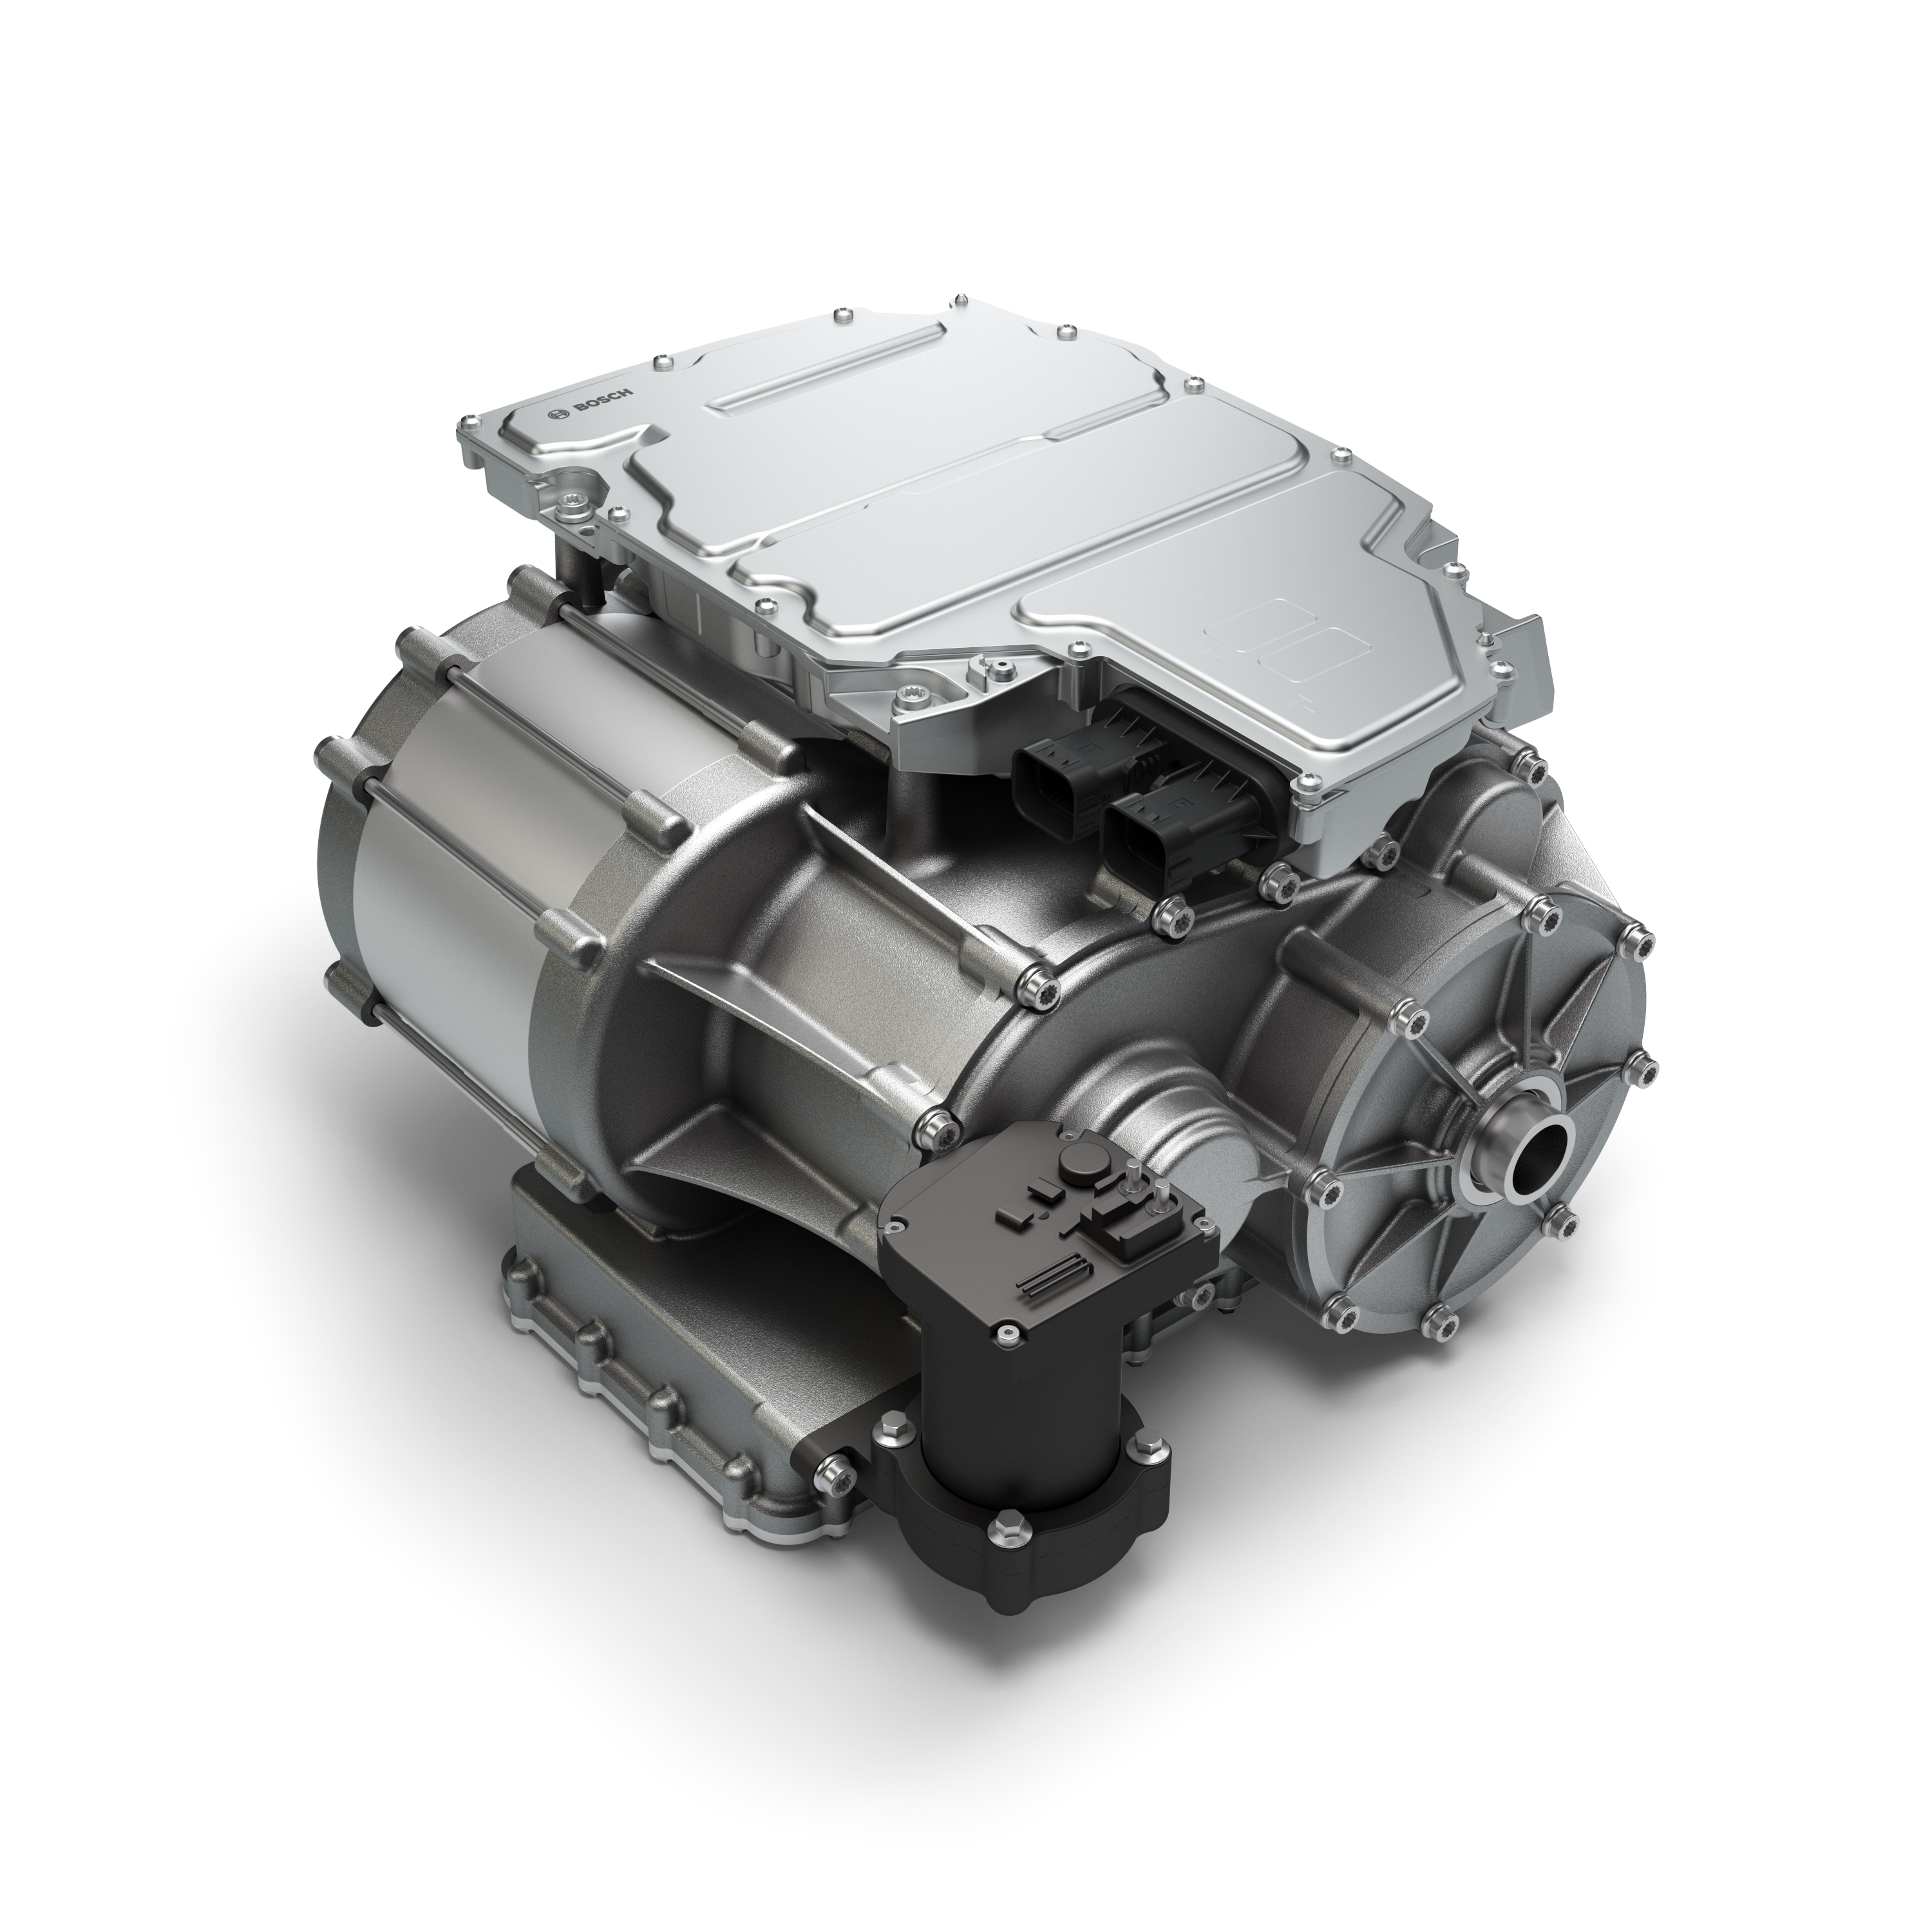 CVT4EV - continuously variable automatic transmission for electric vehicles